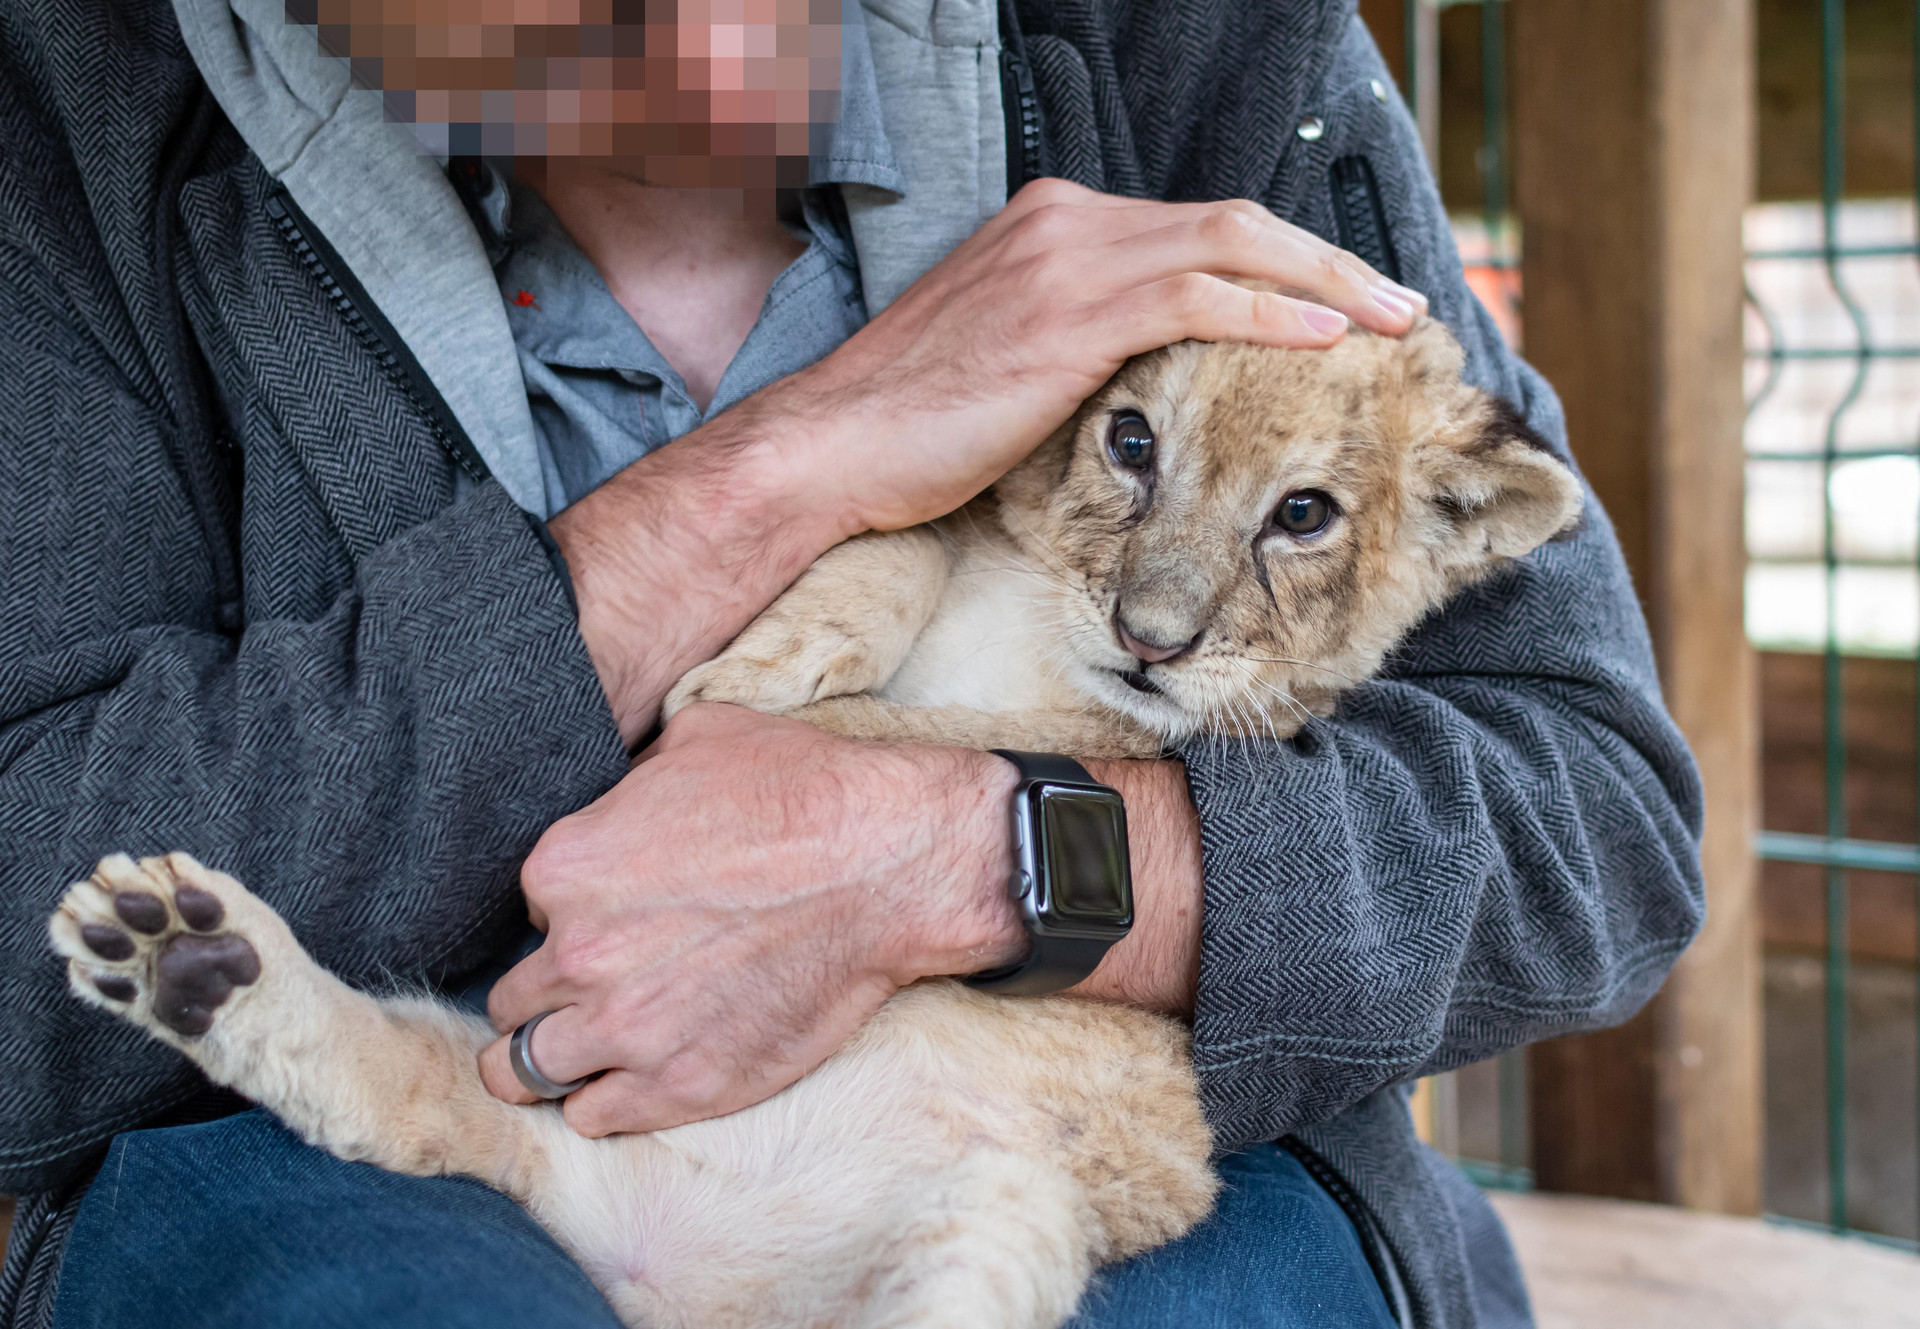 Sad lion cub being held by a man